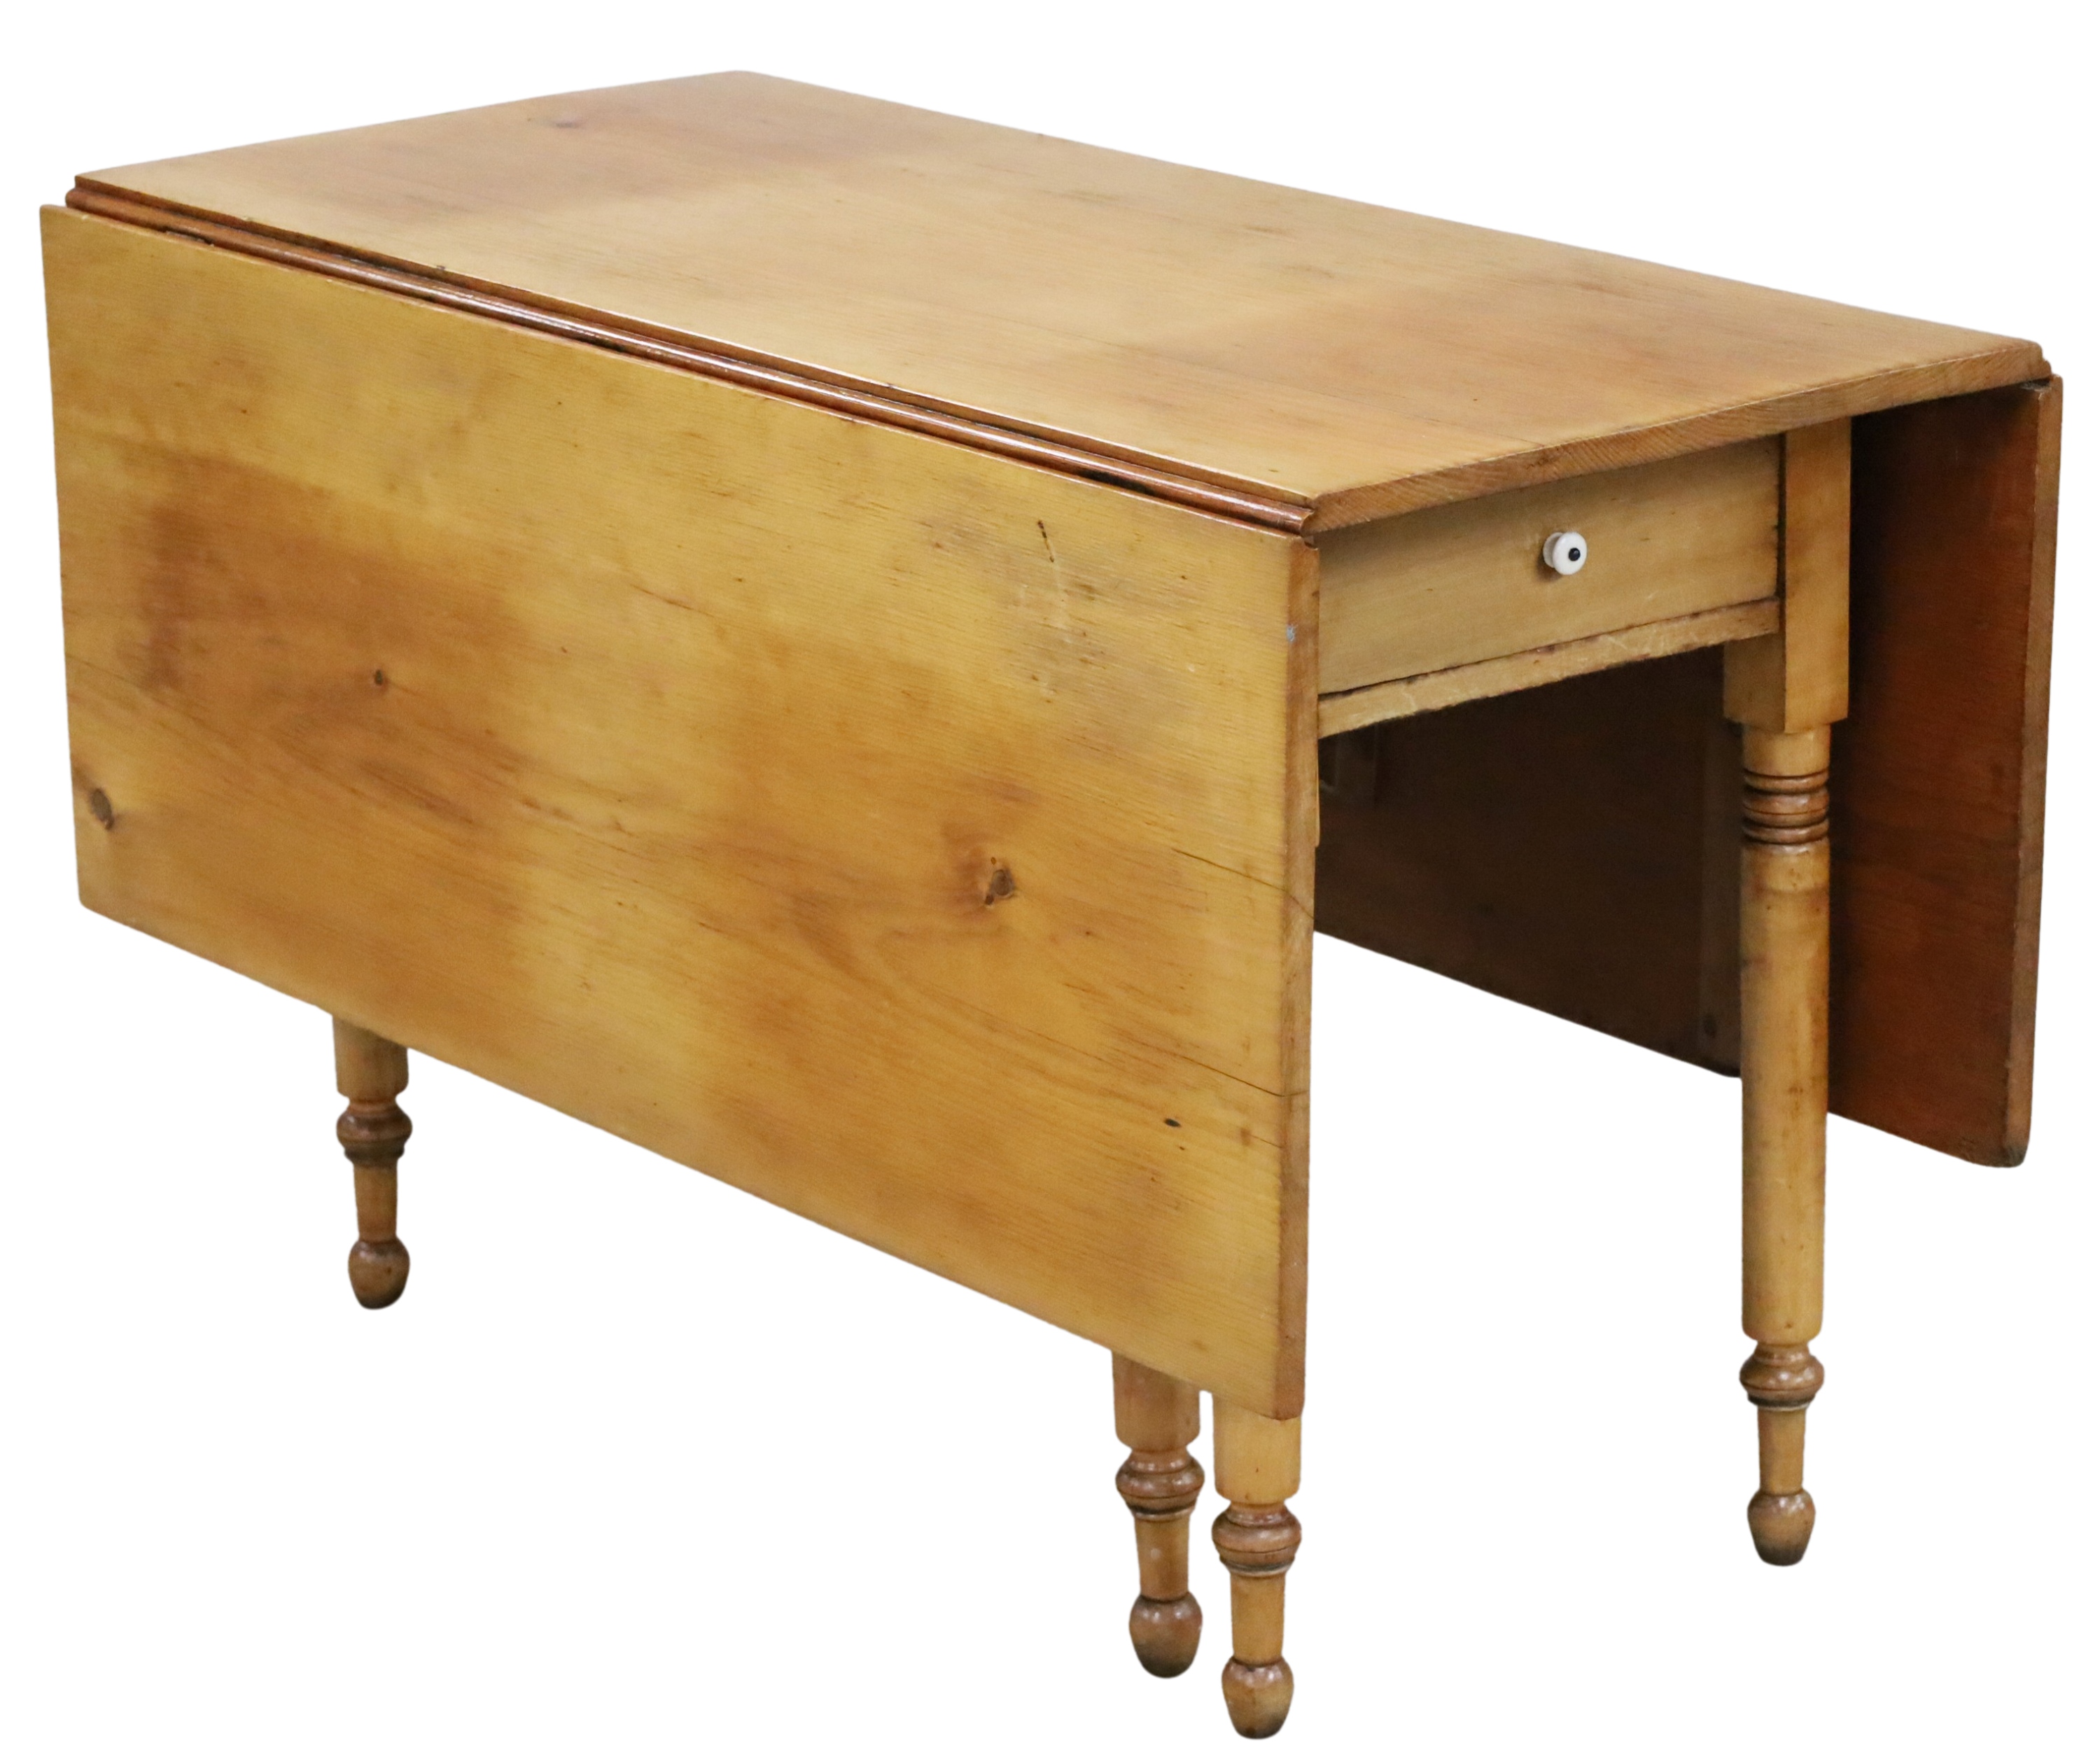 EARLY AMERICAN PINE DROP LEAF TABLE